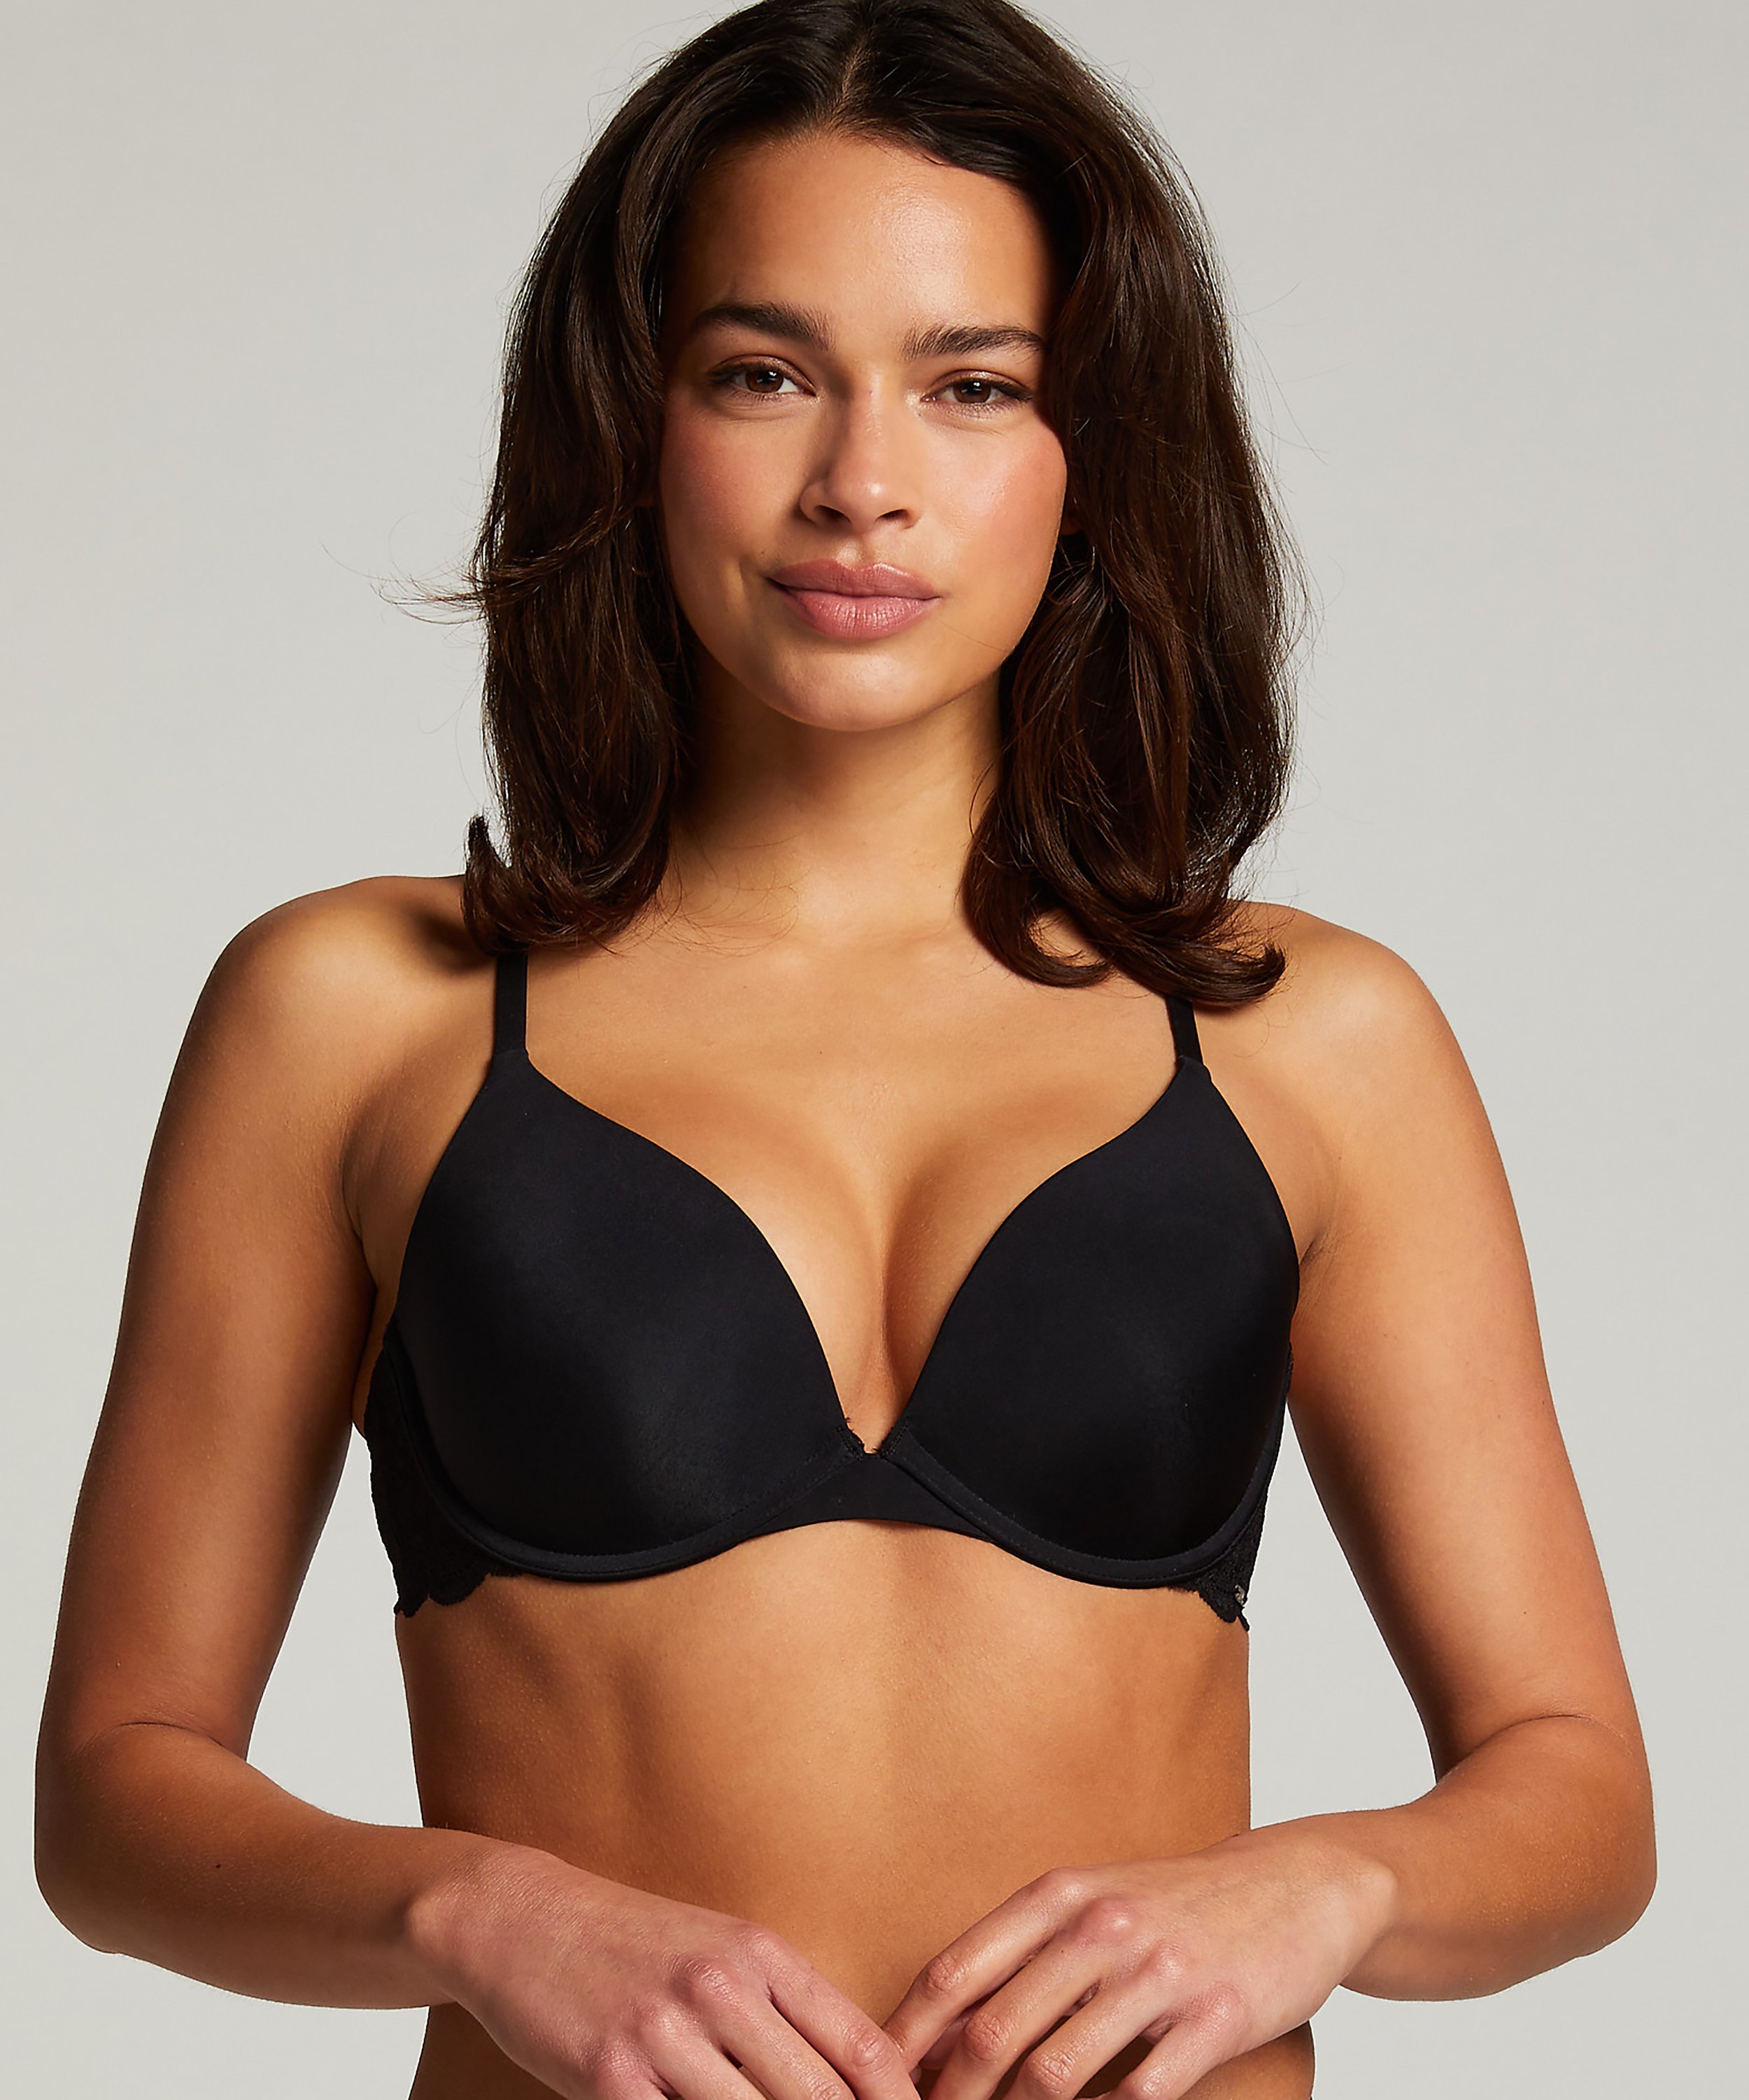 Angie Padded Underwired Push-Up Bra for €29.99 - Push-up Bras - Hunkemöller